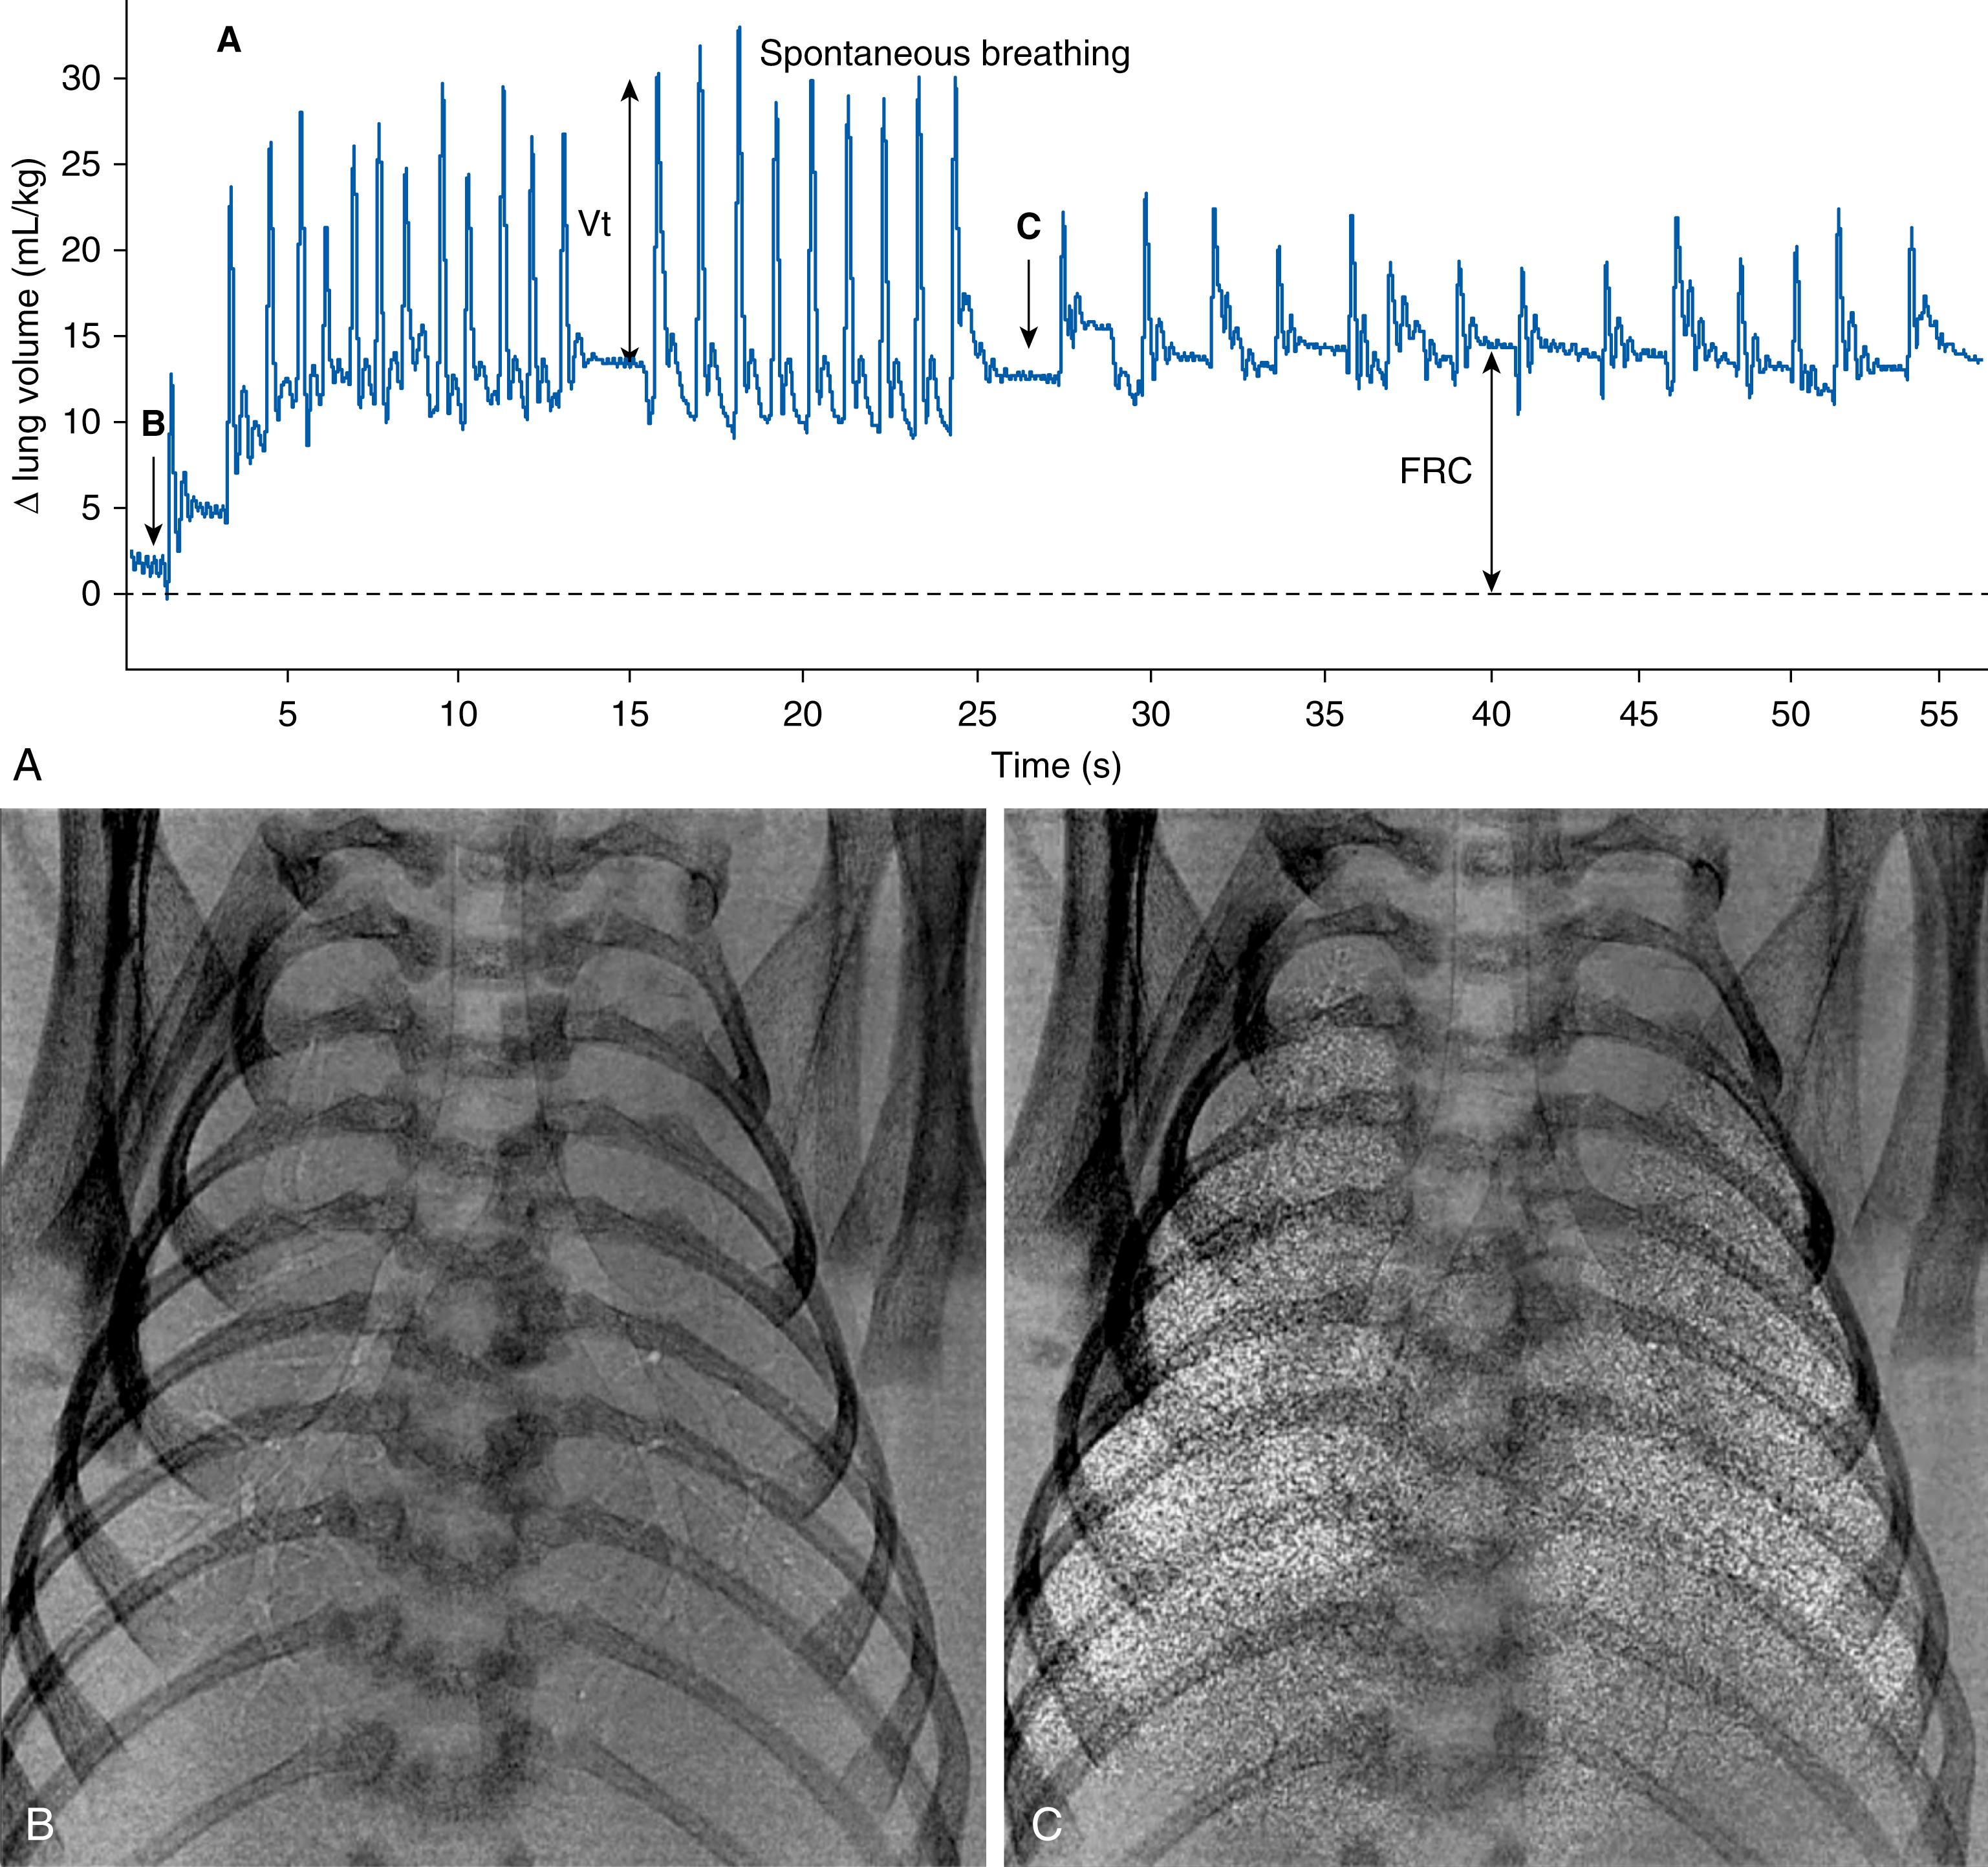 Fig. 150.3, (A) Lung gas volumes measured using a plethysmograph in a spontaneously breathing near term (31 days) newborn rabbit. Simultaneous phase contrast x-ray images were acquired near the beginning of lung aeration (B) and approximately 40 seconds later after the recruitment of a functional residual capacity (FRC) of approximately 15 mL/kg (C). The times at which each image was acquired are indicated by arrows on the plethysmograph recording. Initially, the tidal volume (Vt) of the initial spontaneous breaths was large (approximately 15 mL/kg), but this gradually reduced as the lung aerated. 23